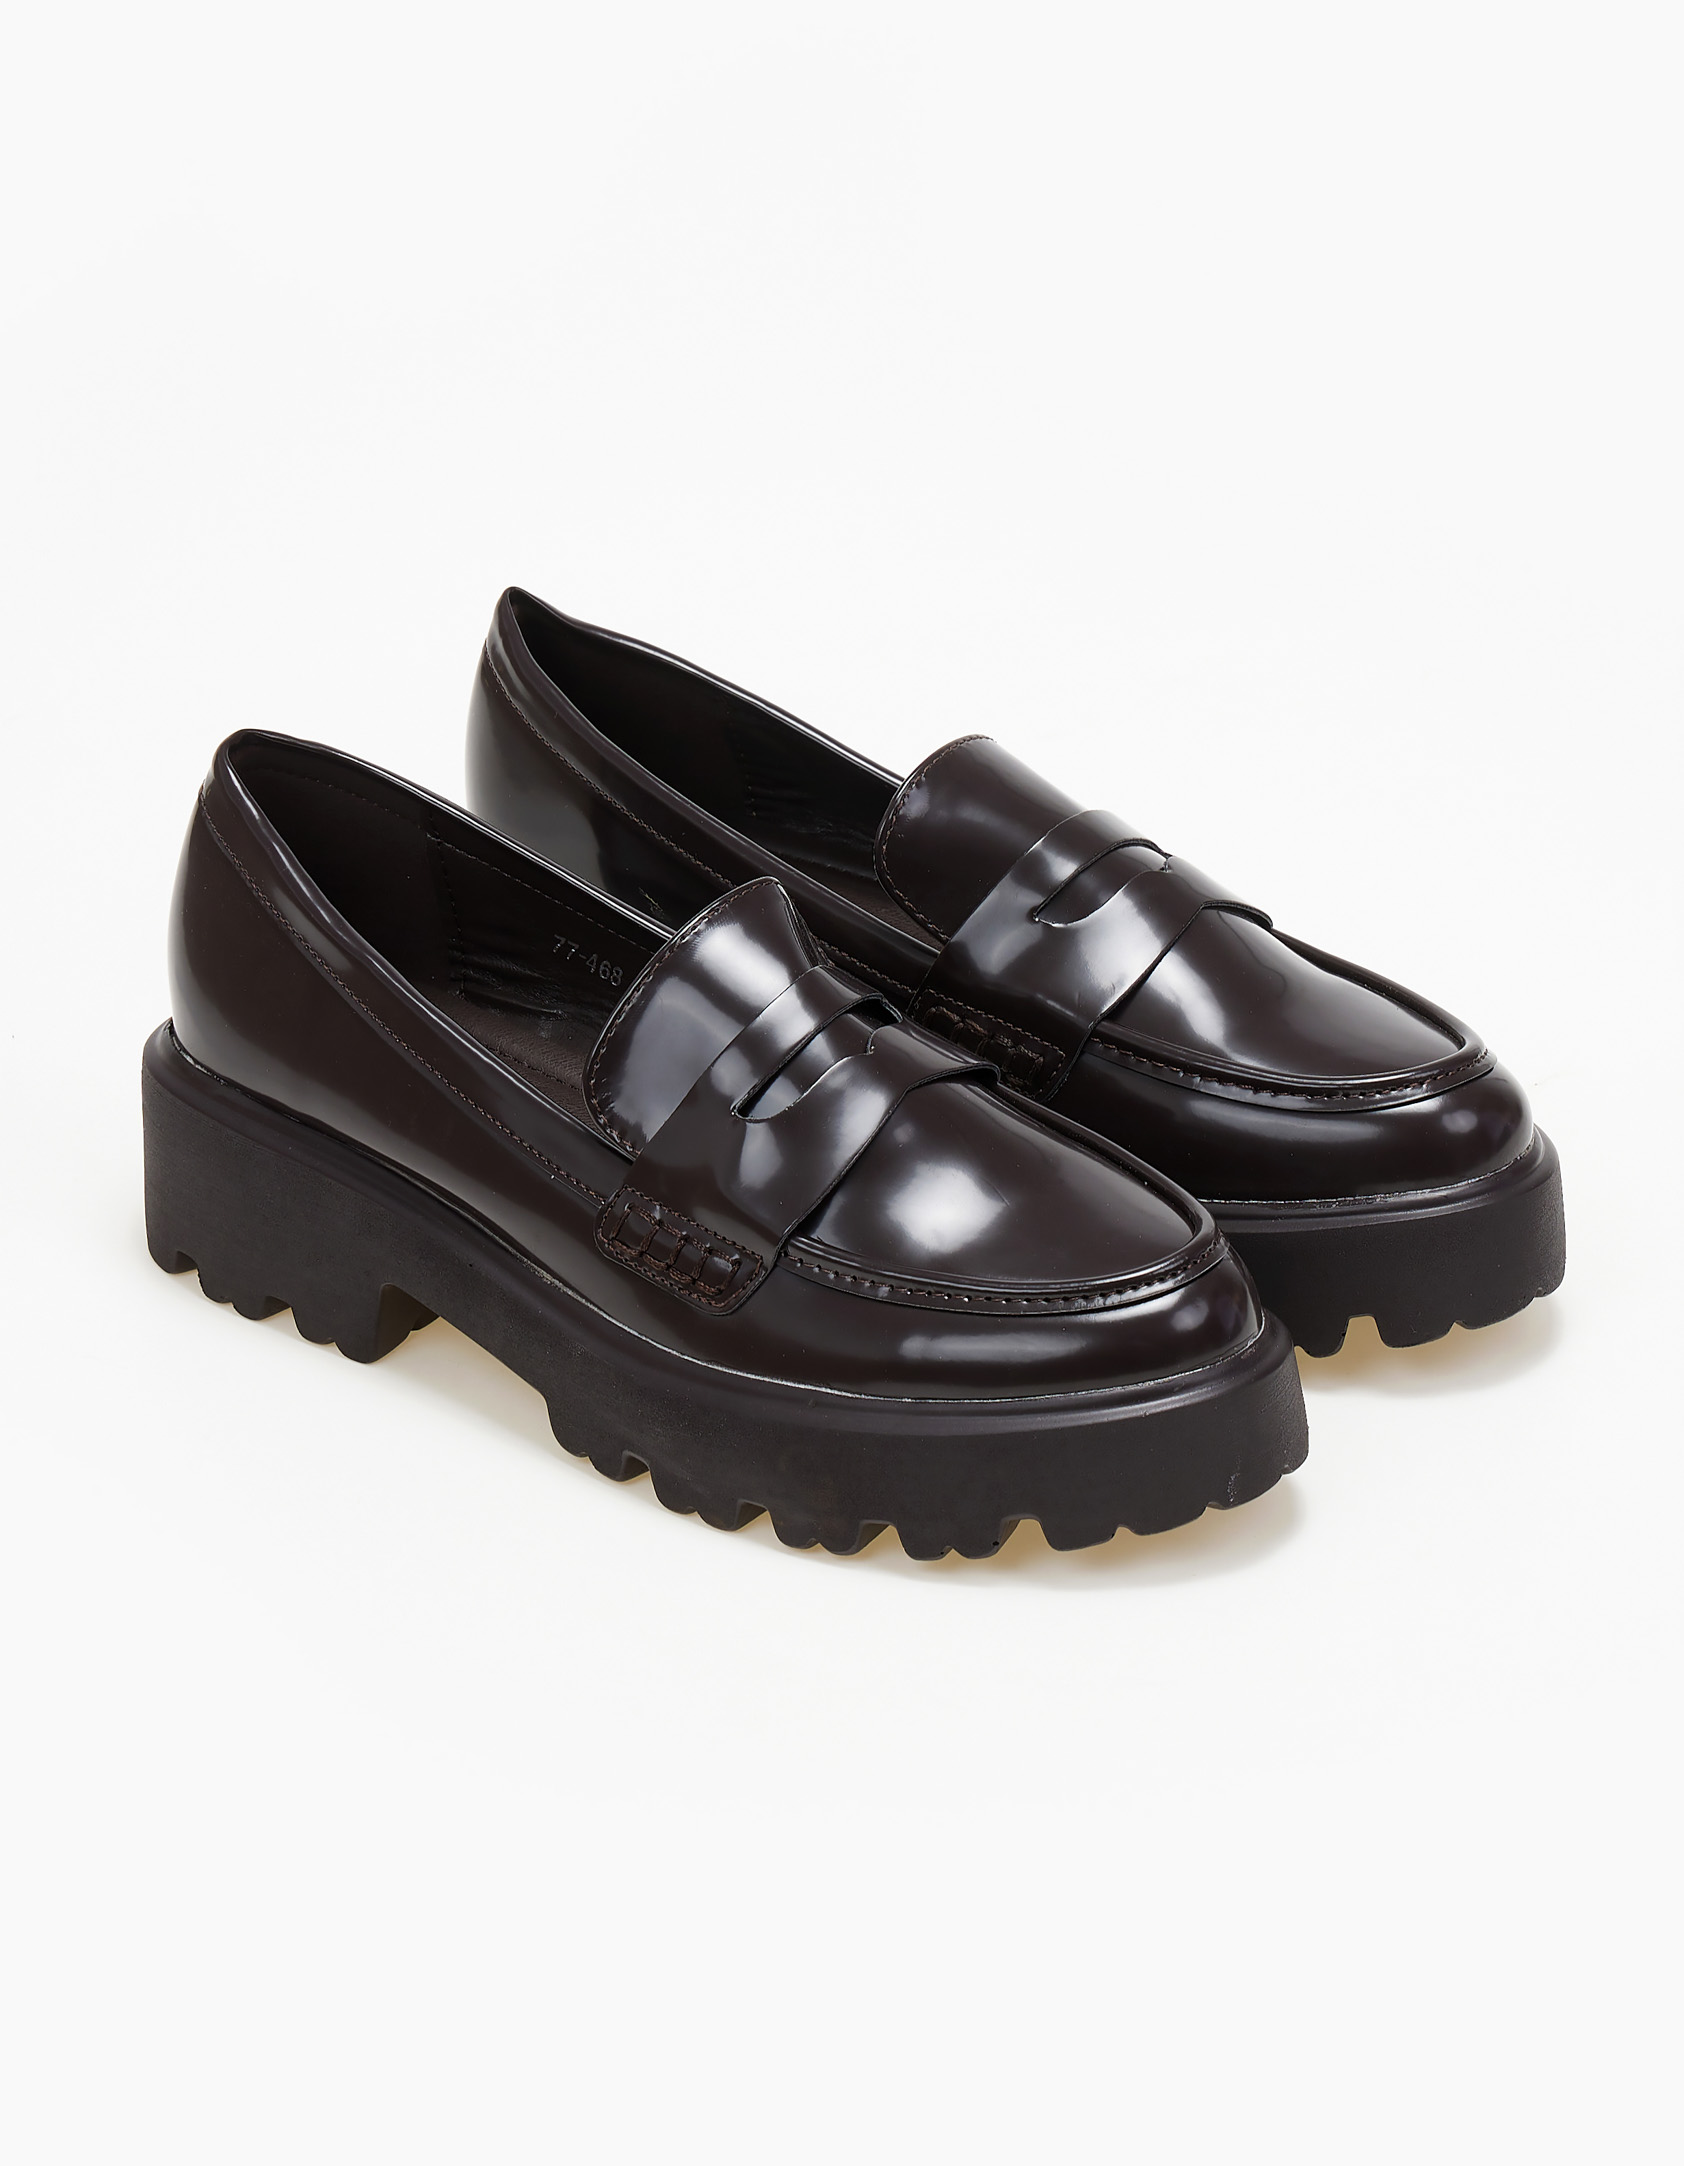 Loafers με τρακτερωτή σόλα - Καφέ Παπούτσια > Loafers